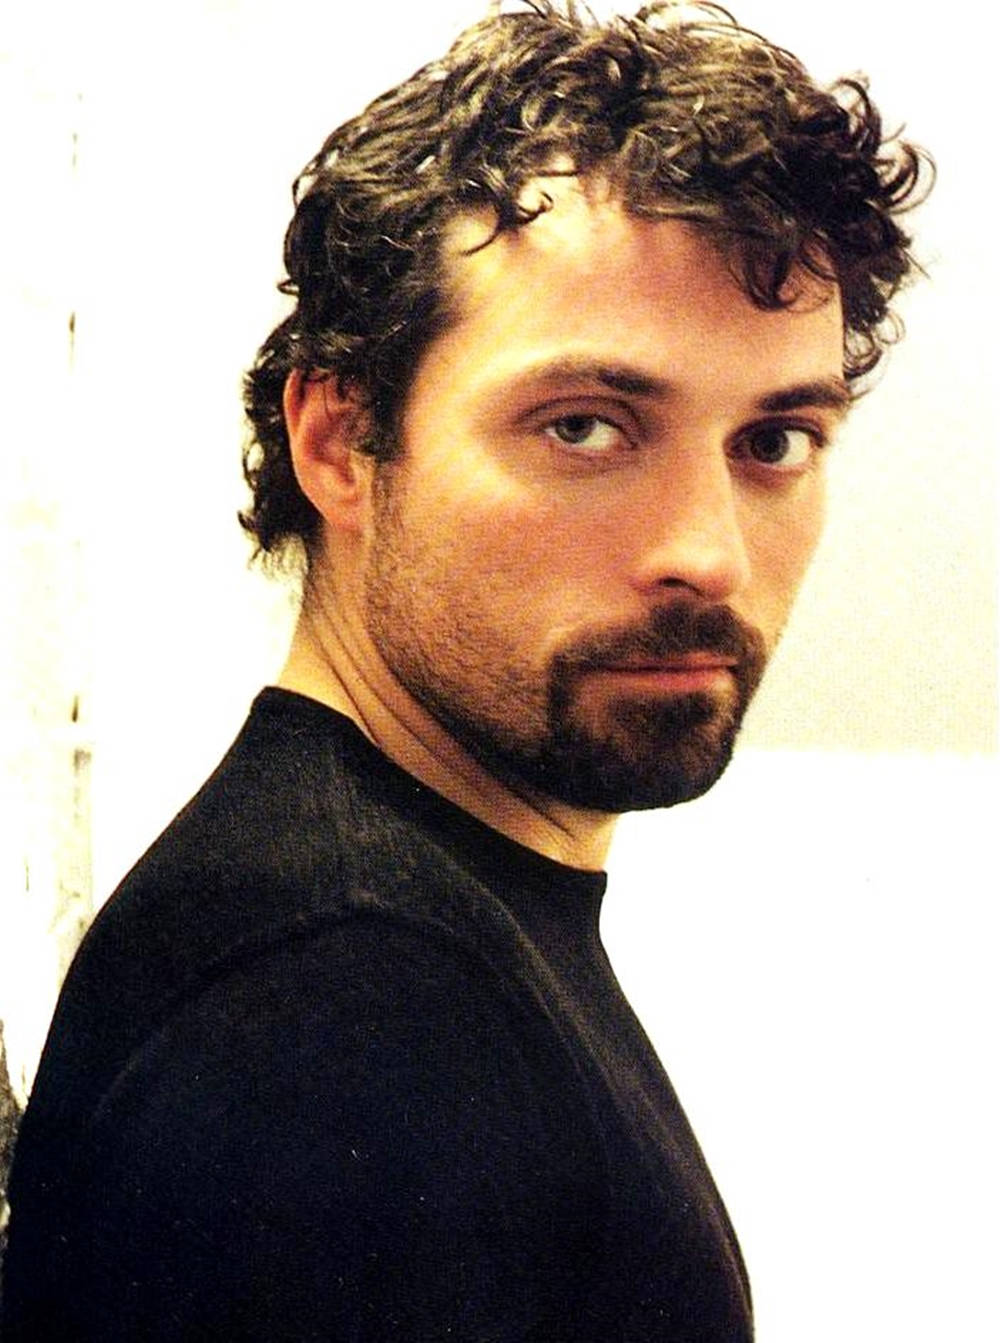 British Actor Rufus Sewell Posing with Curly Hair and Dark Beard Wallpaper